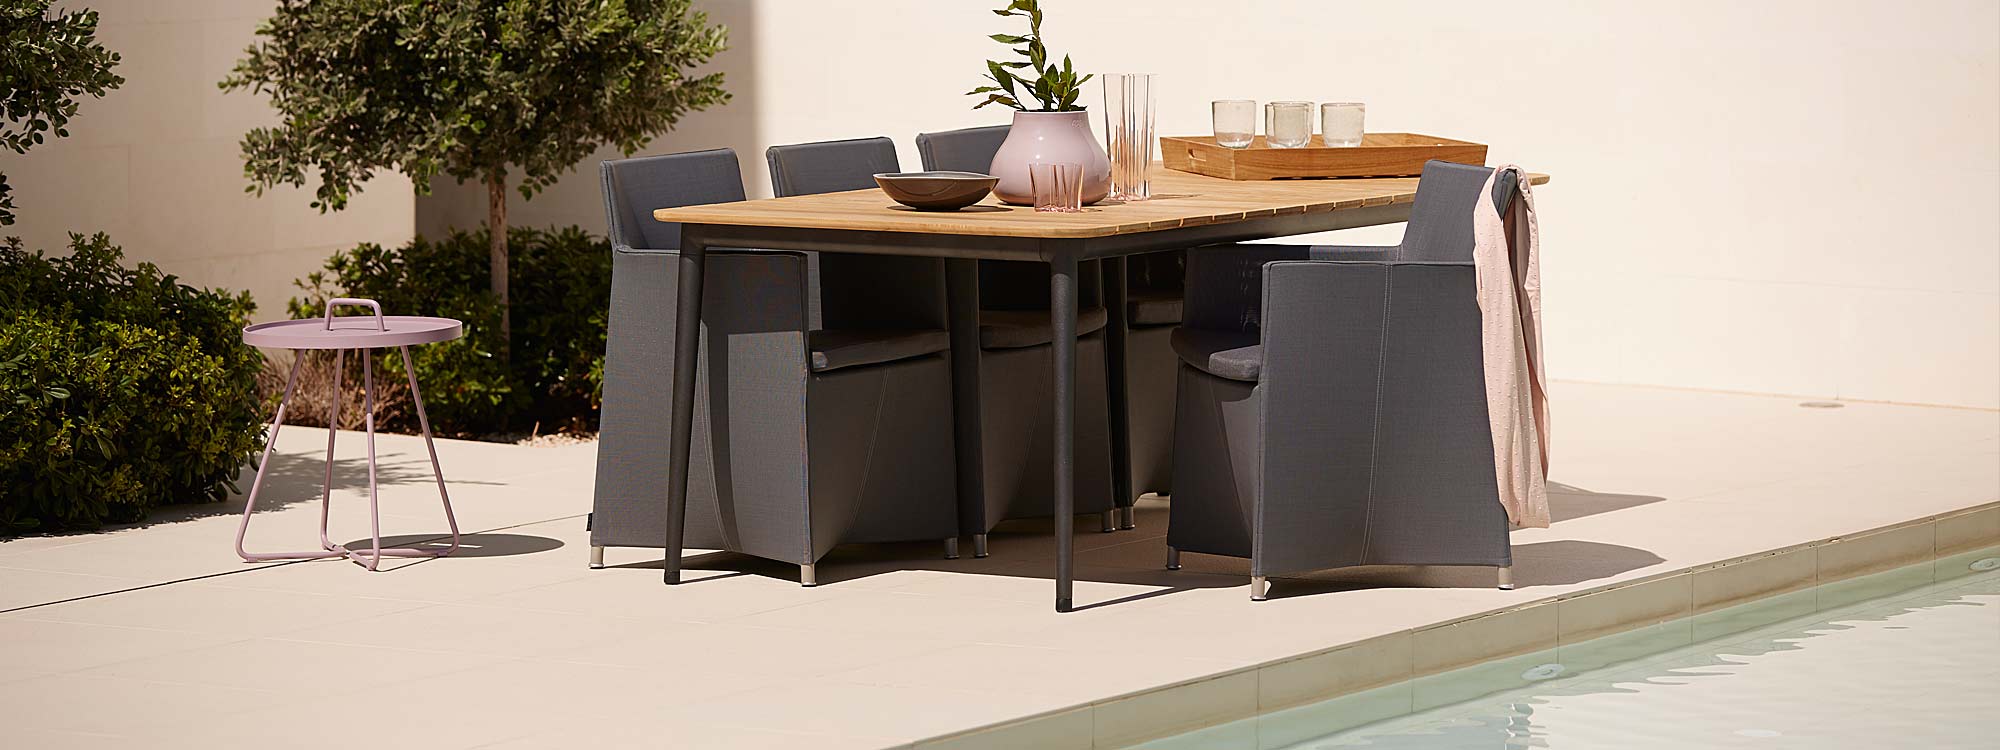 Image of Diamond dining chair with Core extending teak table with lava-grey aluminium base by Cane-line